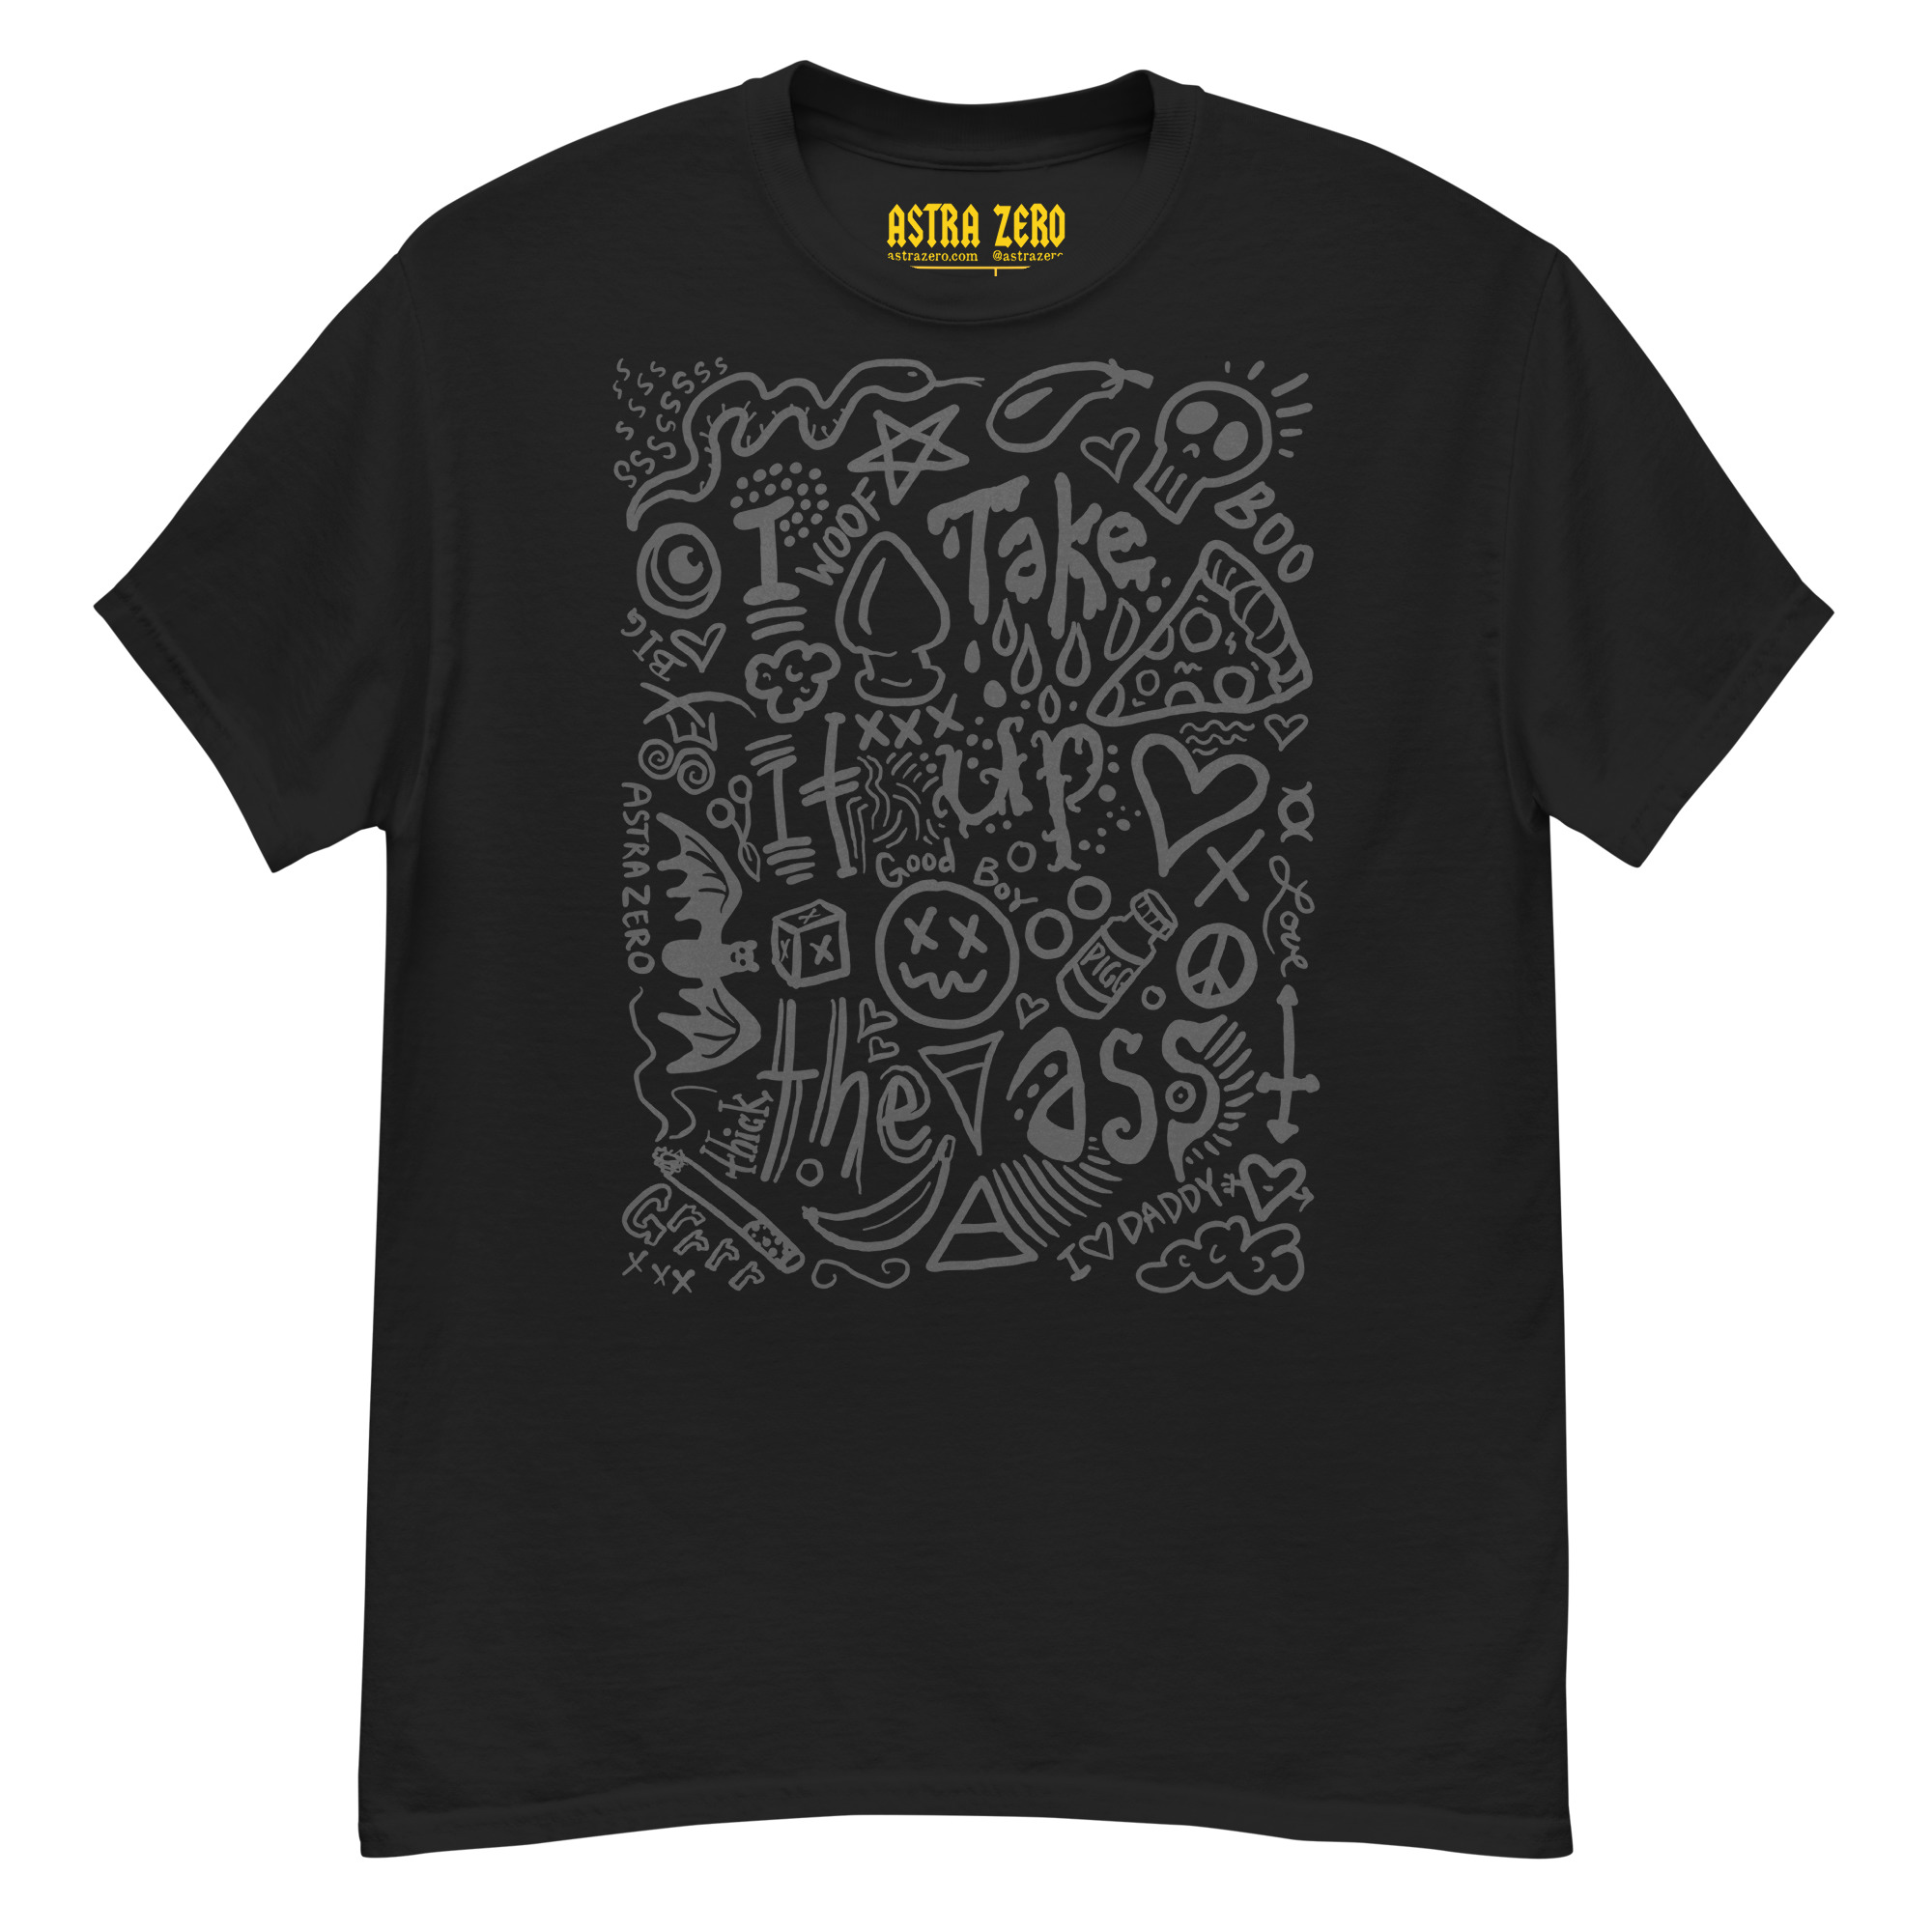 Featured image for “I Take it Up the Ass ( Dark ) - Men's classic tee”